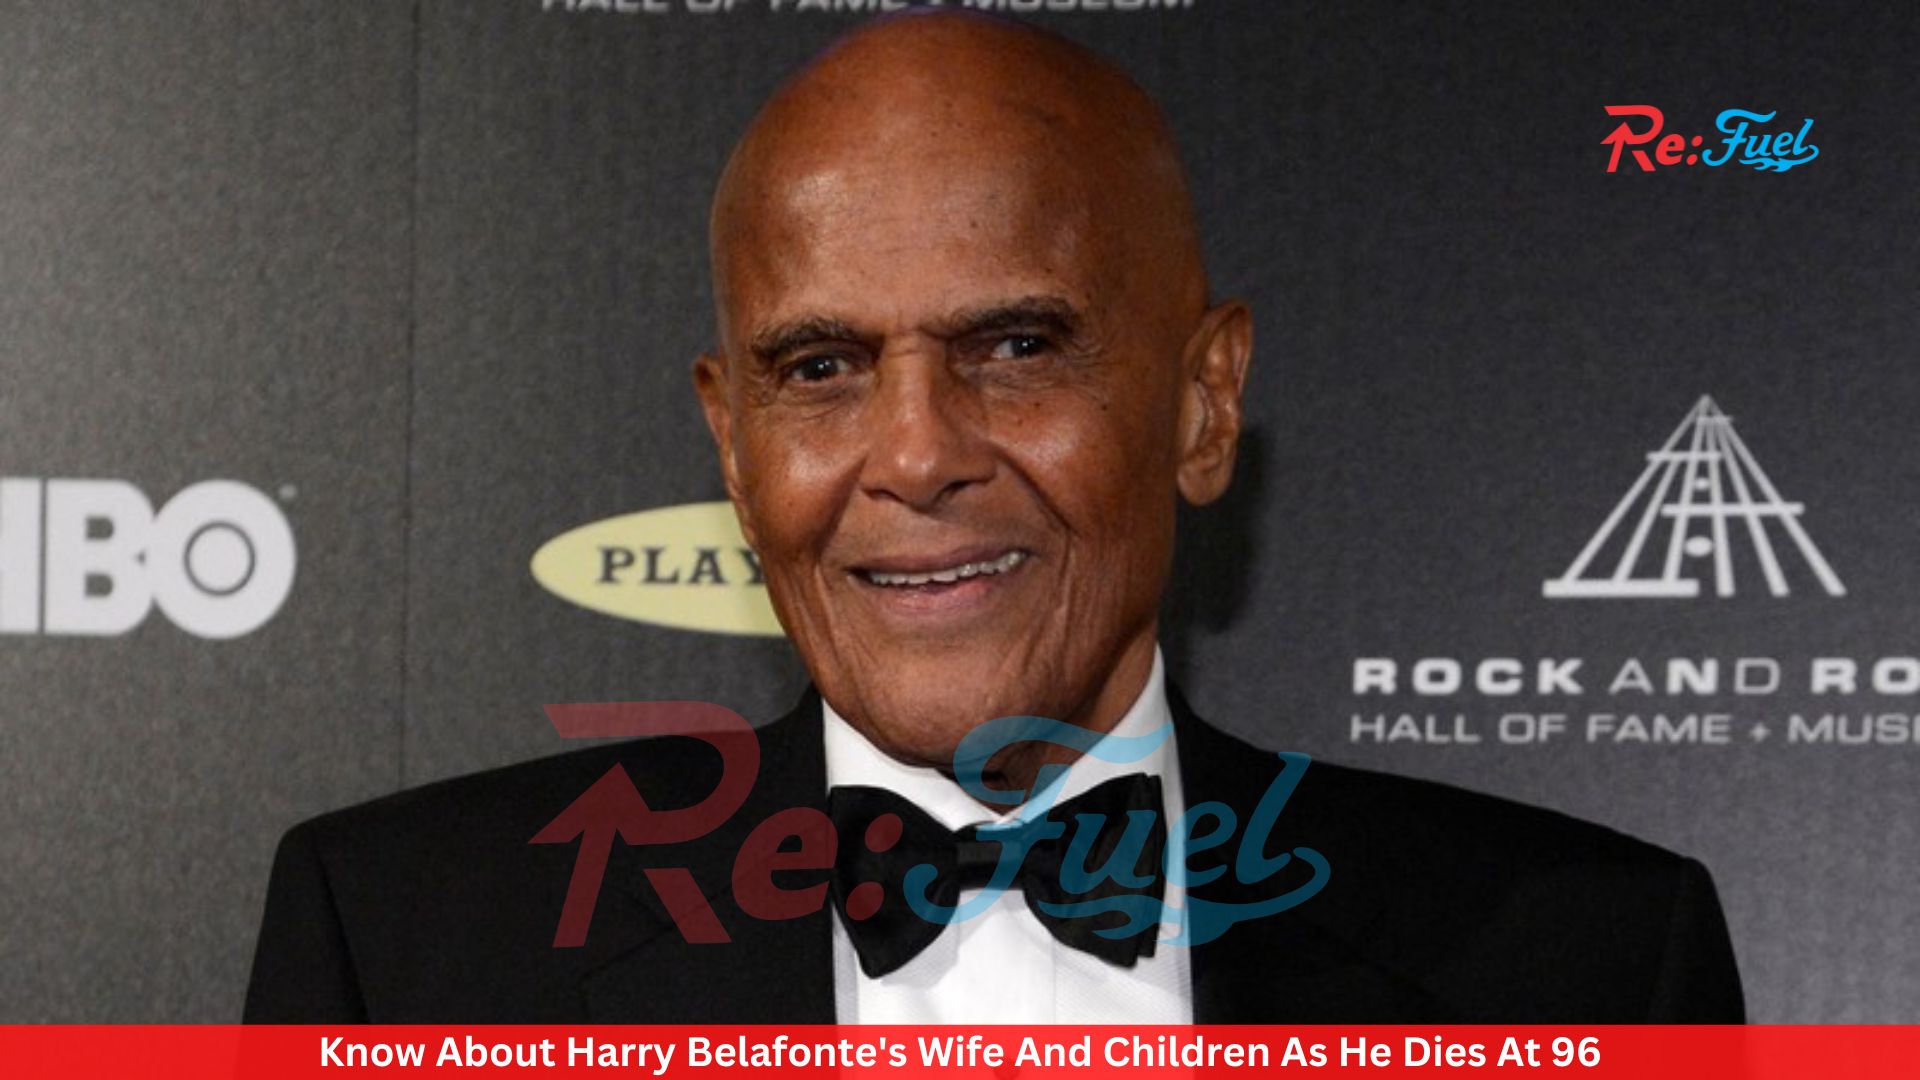 Know About Harry Belafonte's Wife And Children As He Dies At 96